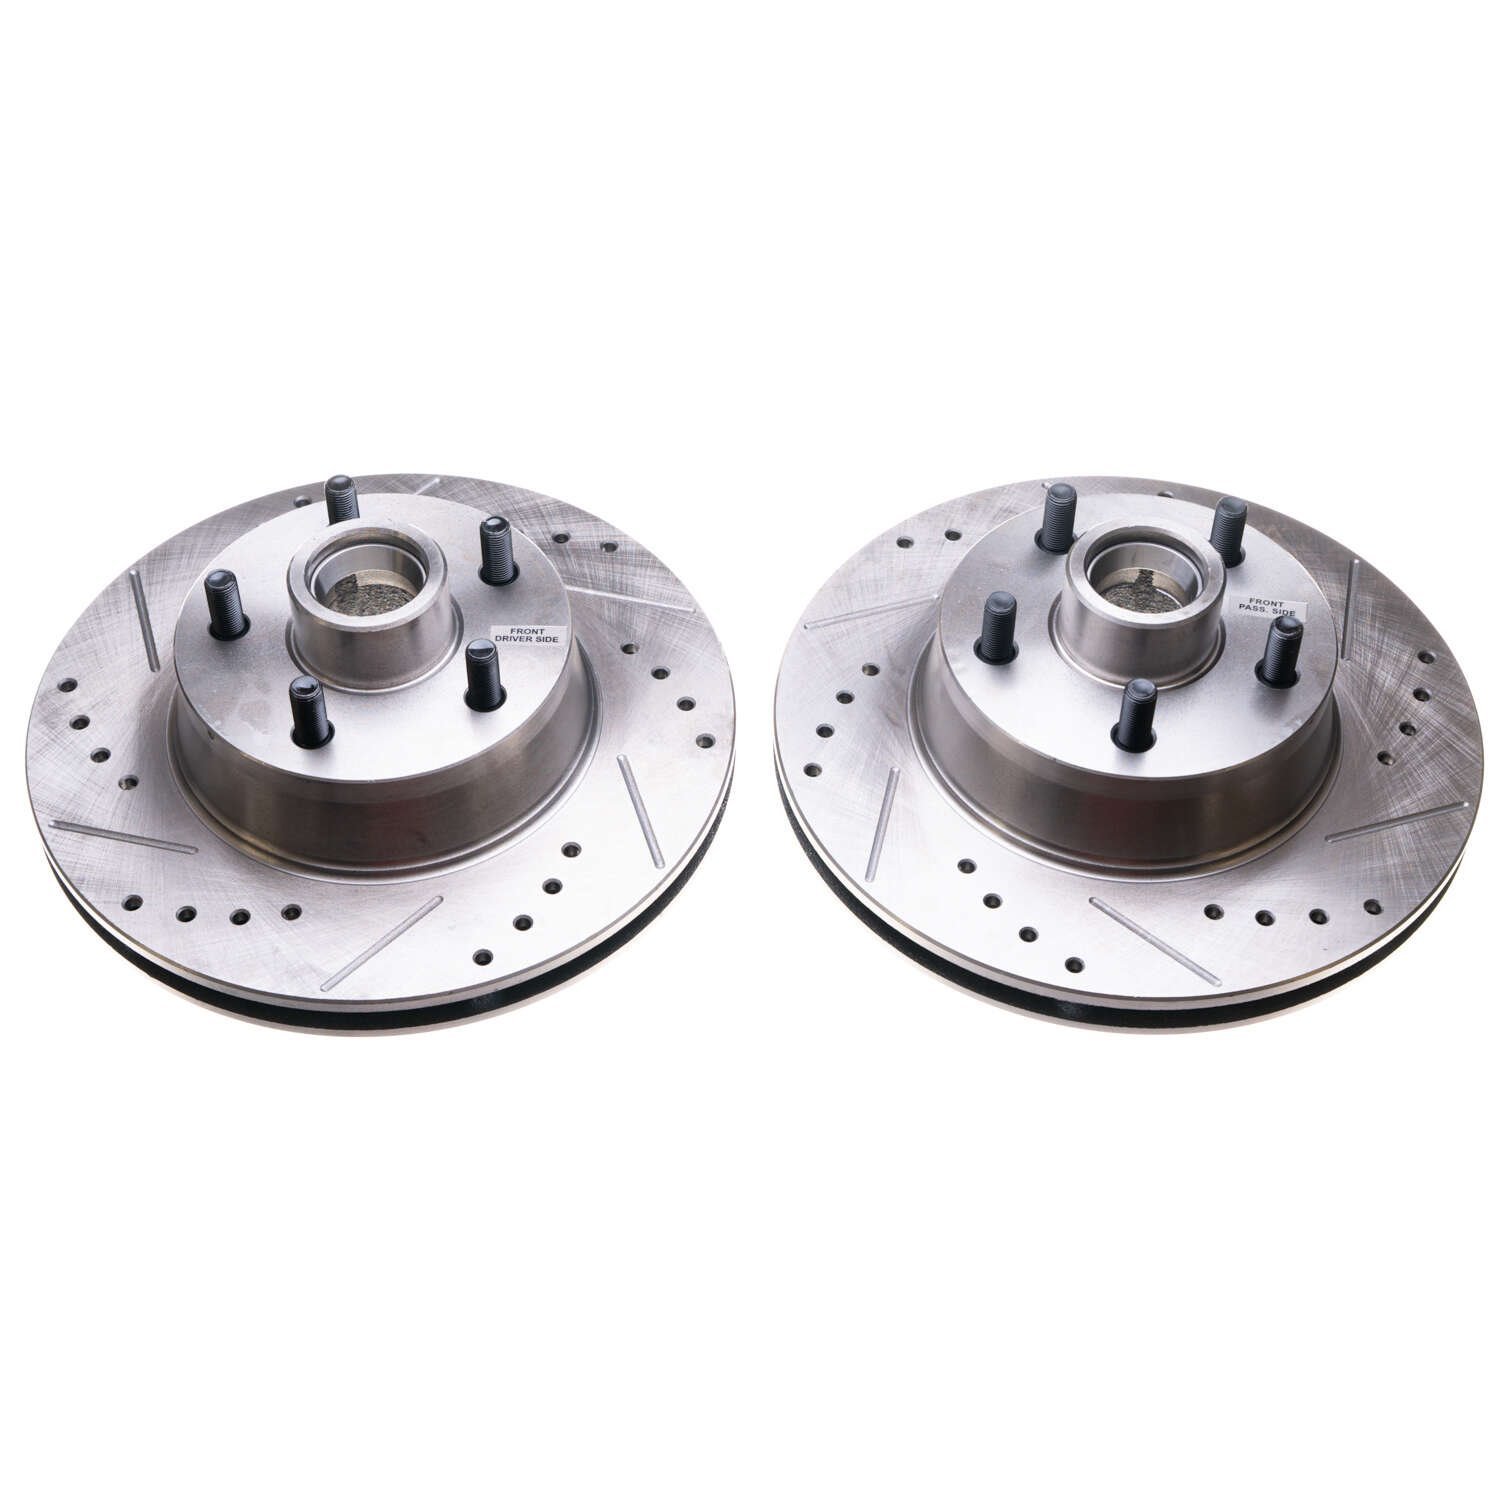 Drilled and Slotted Brake Rotors Fits Select 1968-1973